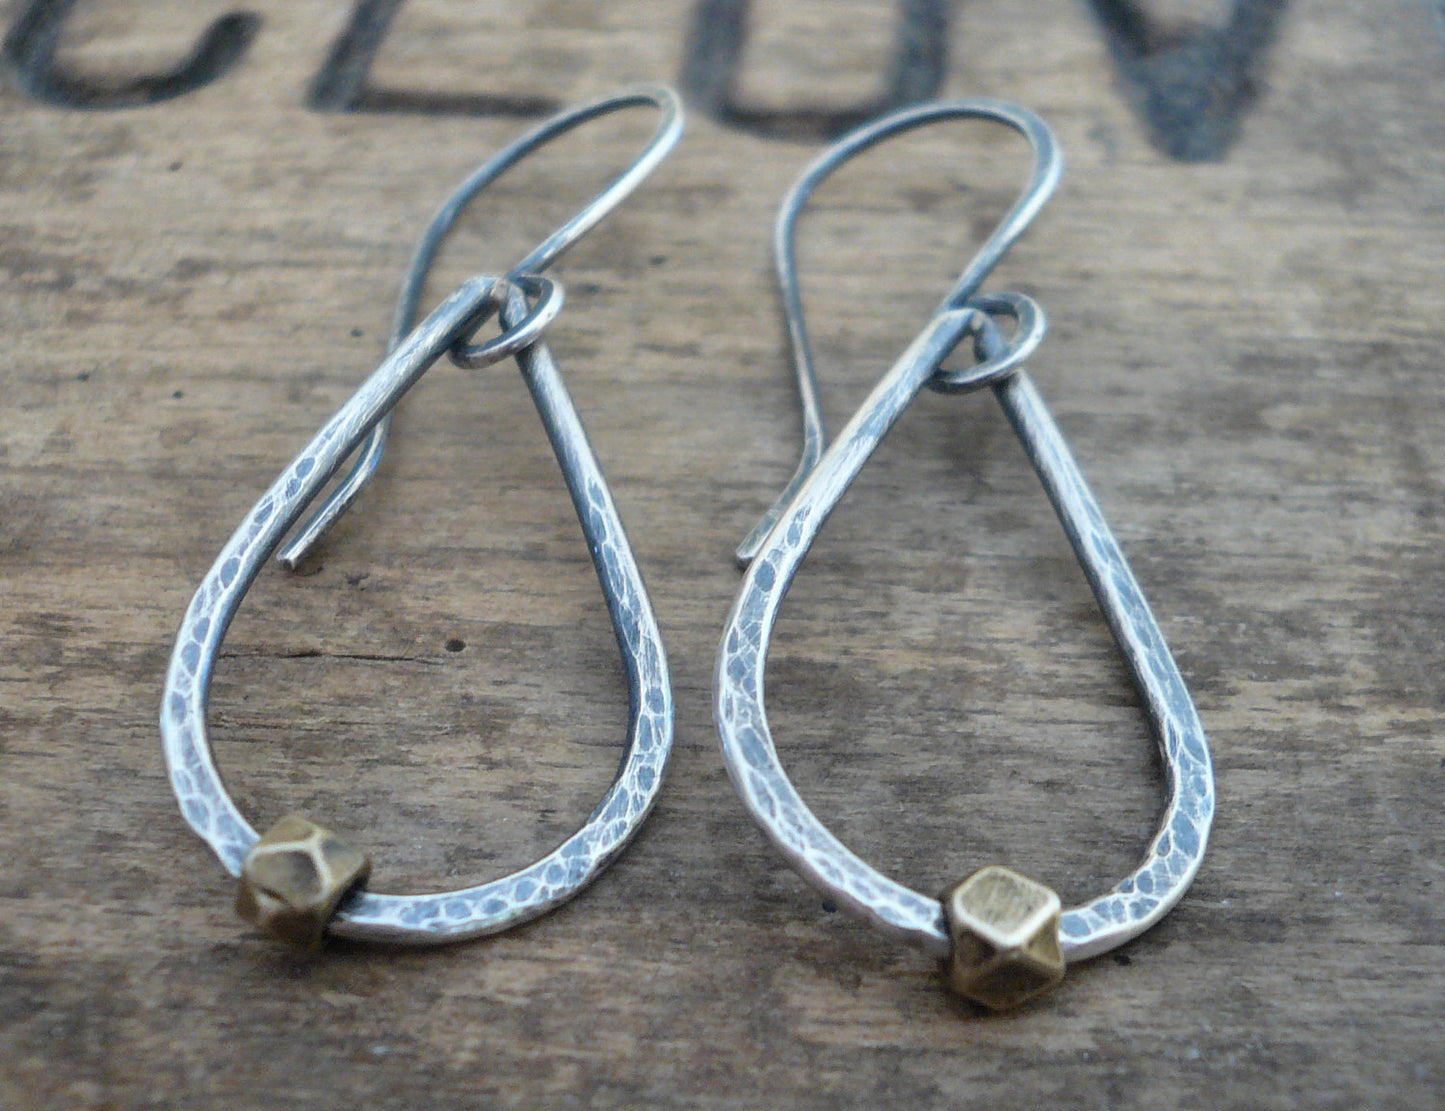 Large Cosset Earrings - Handmade. Brass. Oxidized, Hammered Sterling Silver